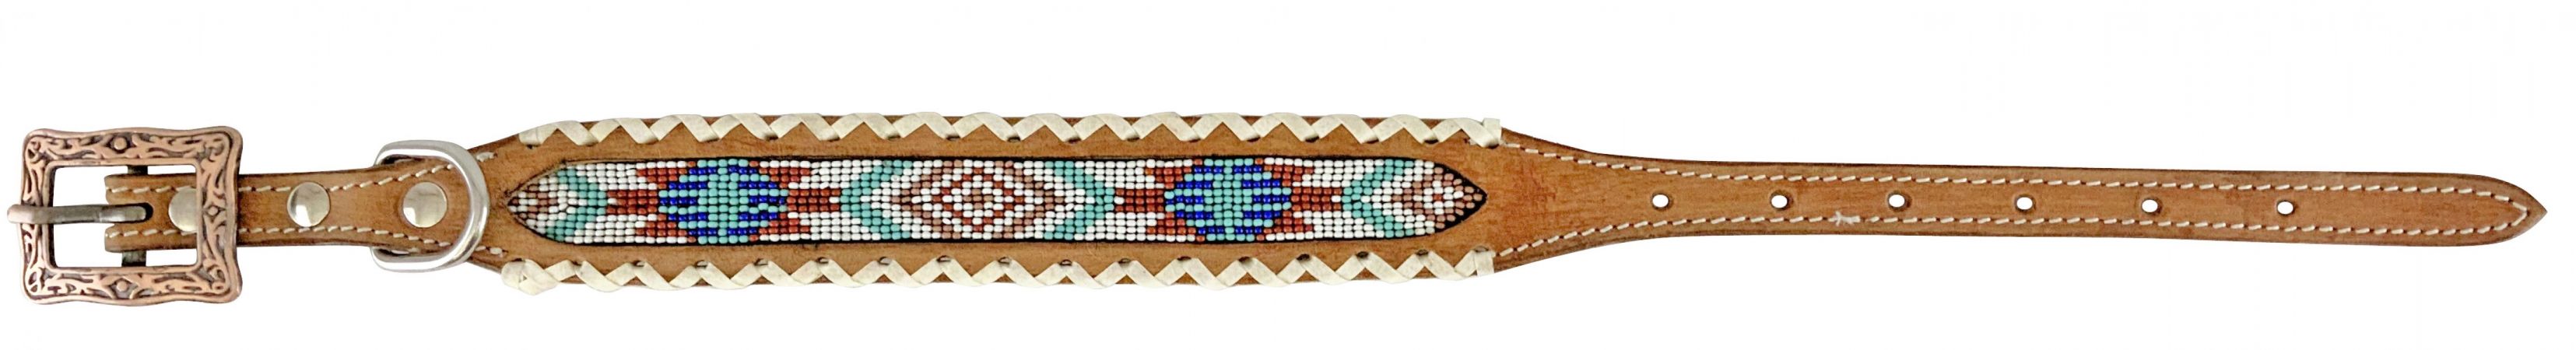 Showman Couture Genuine leather dog collar with beaded inlay - white whipstitching